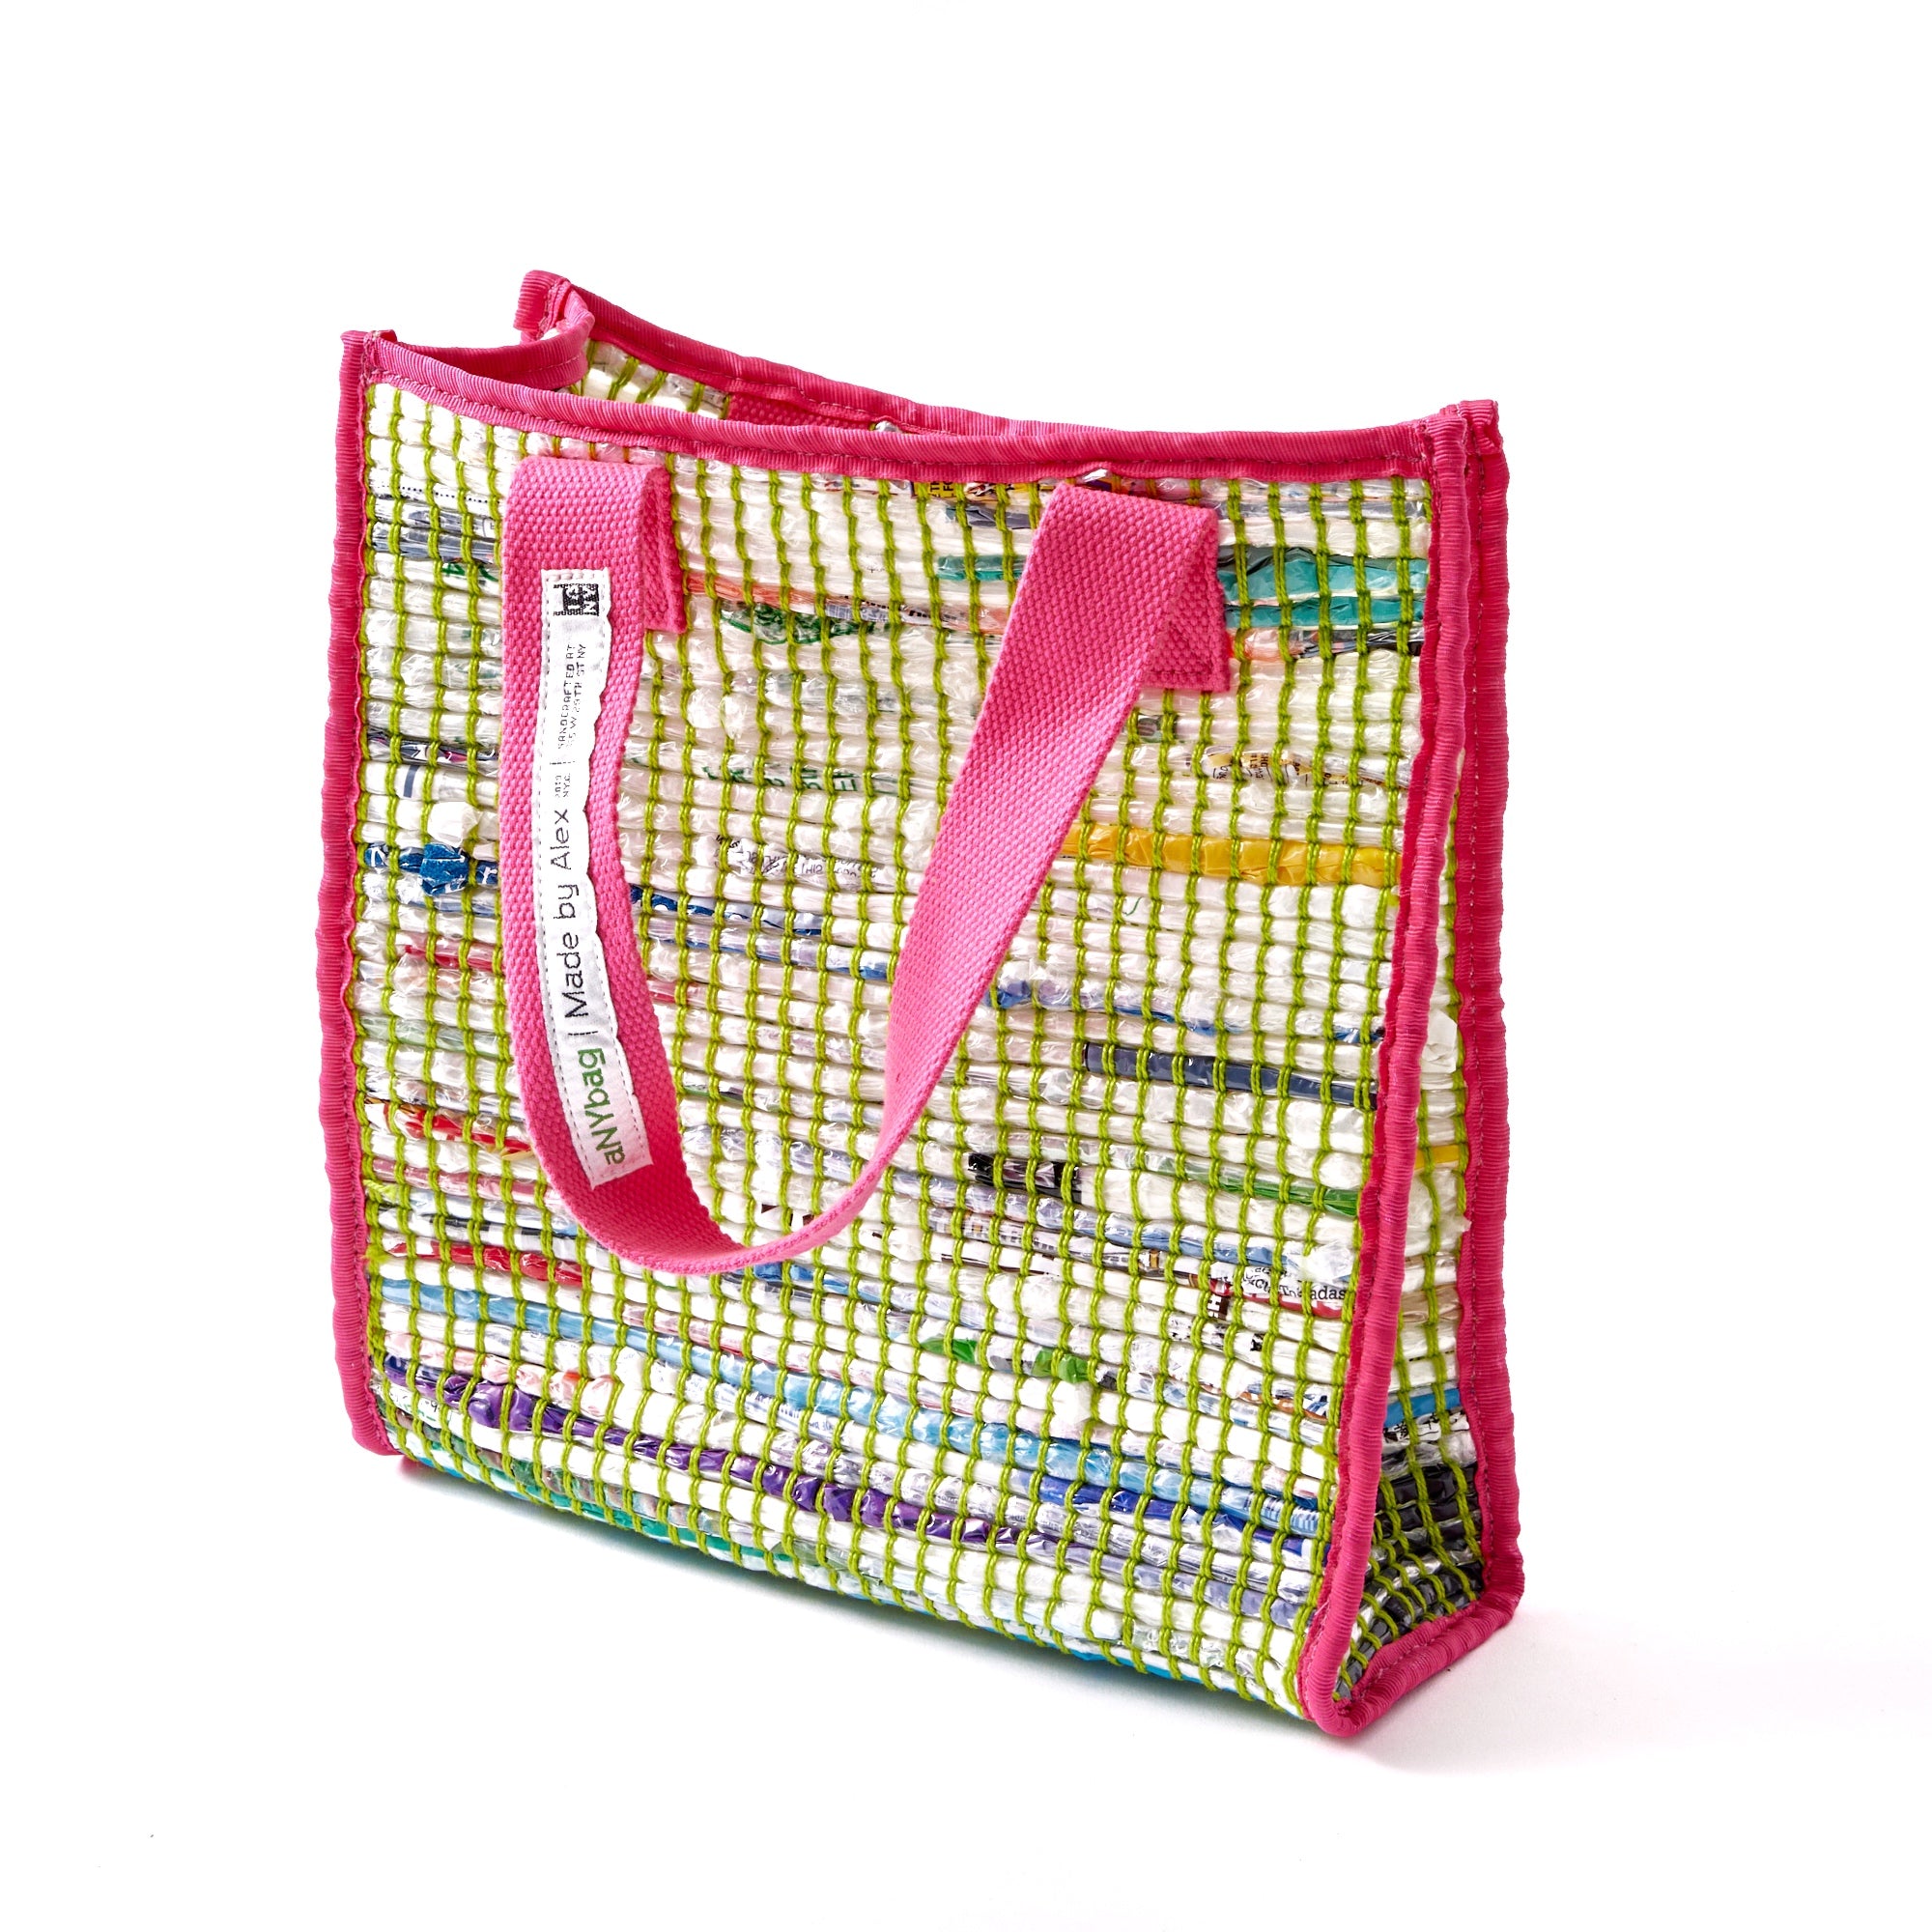 THE MINI in Neon Punch - aNYbag Made in NYC